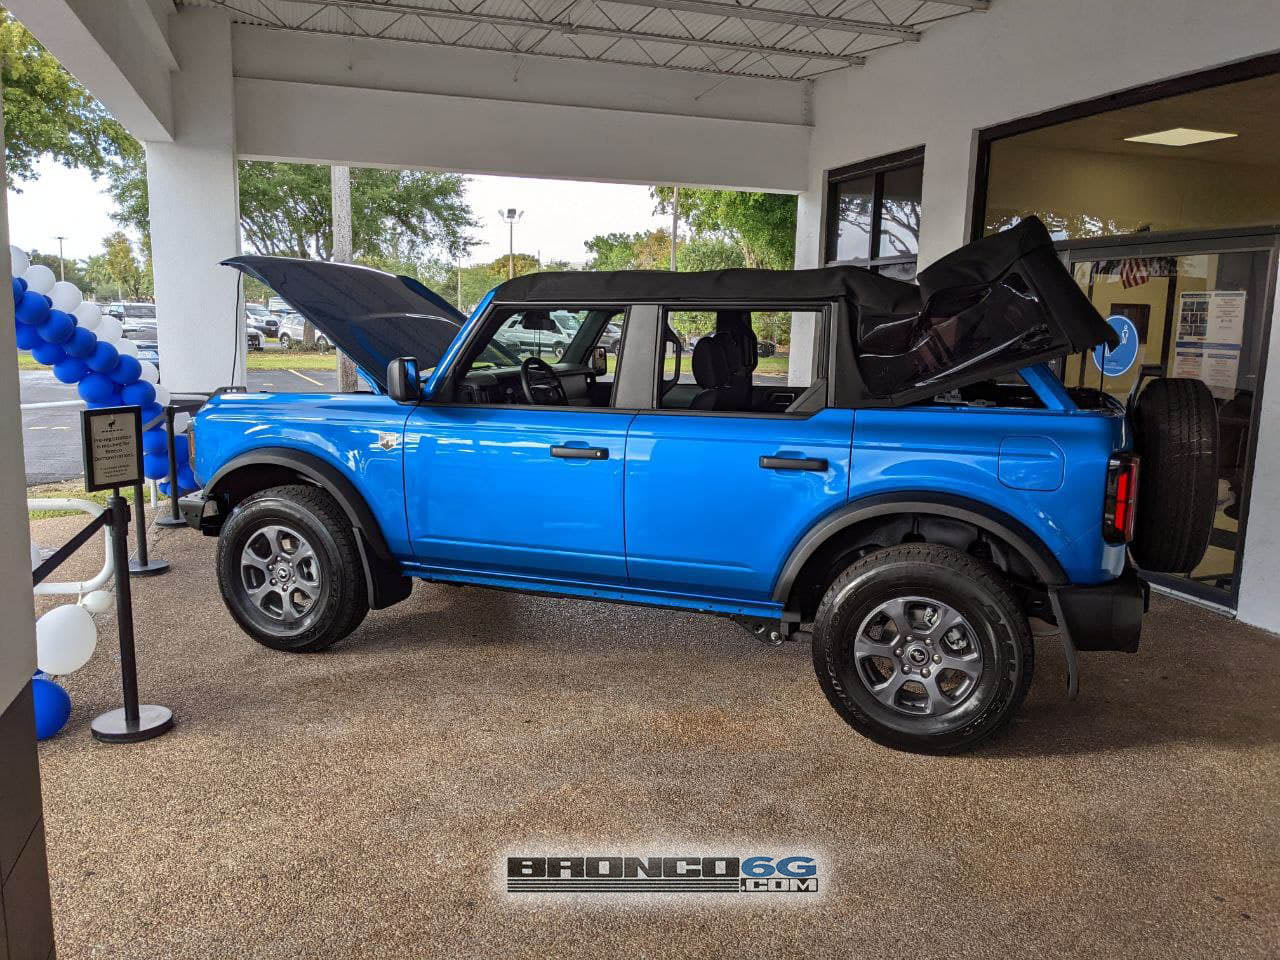 Ford Bronco Bronco Event @ Midway Ford in Miami: 4-Door BB in Velocity Blue & 4-Door OBX in Rapid Red 4-Door 2021 Bronco Big Bend Velocity Blue Soft Top 2